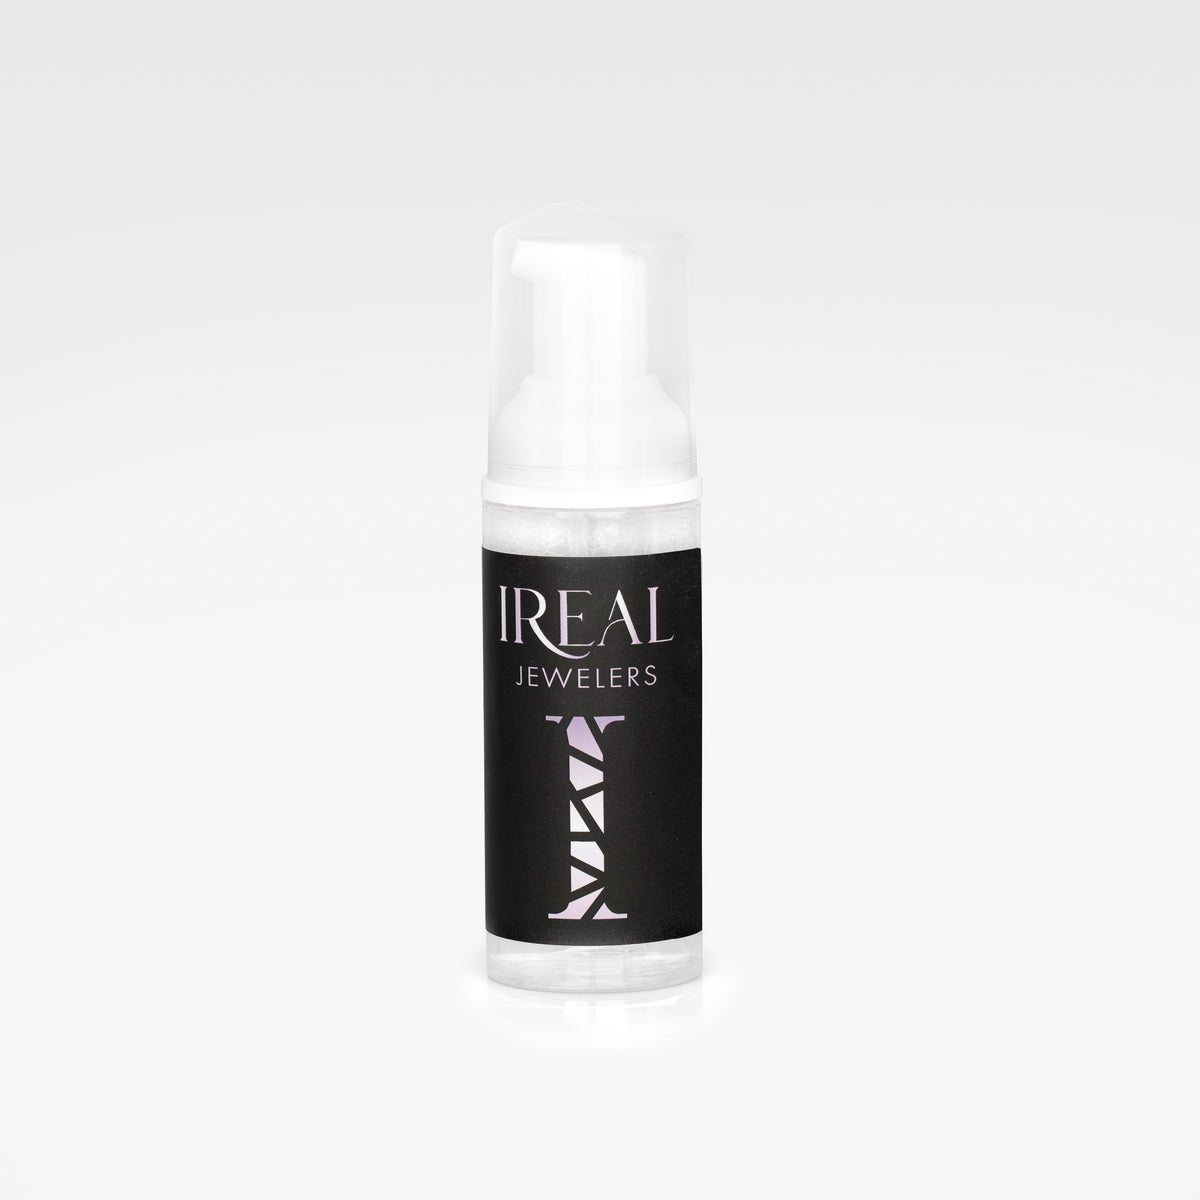 Ireal Jewelry Cleaner